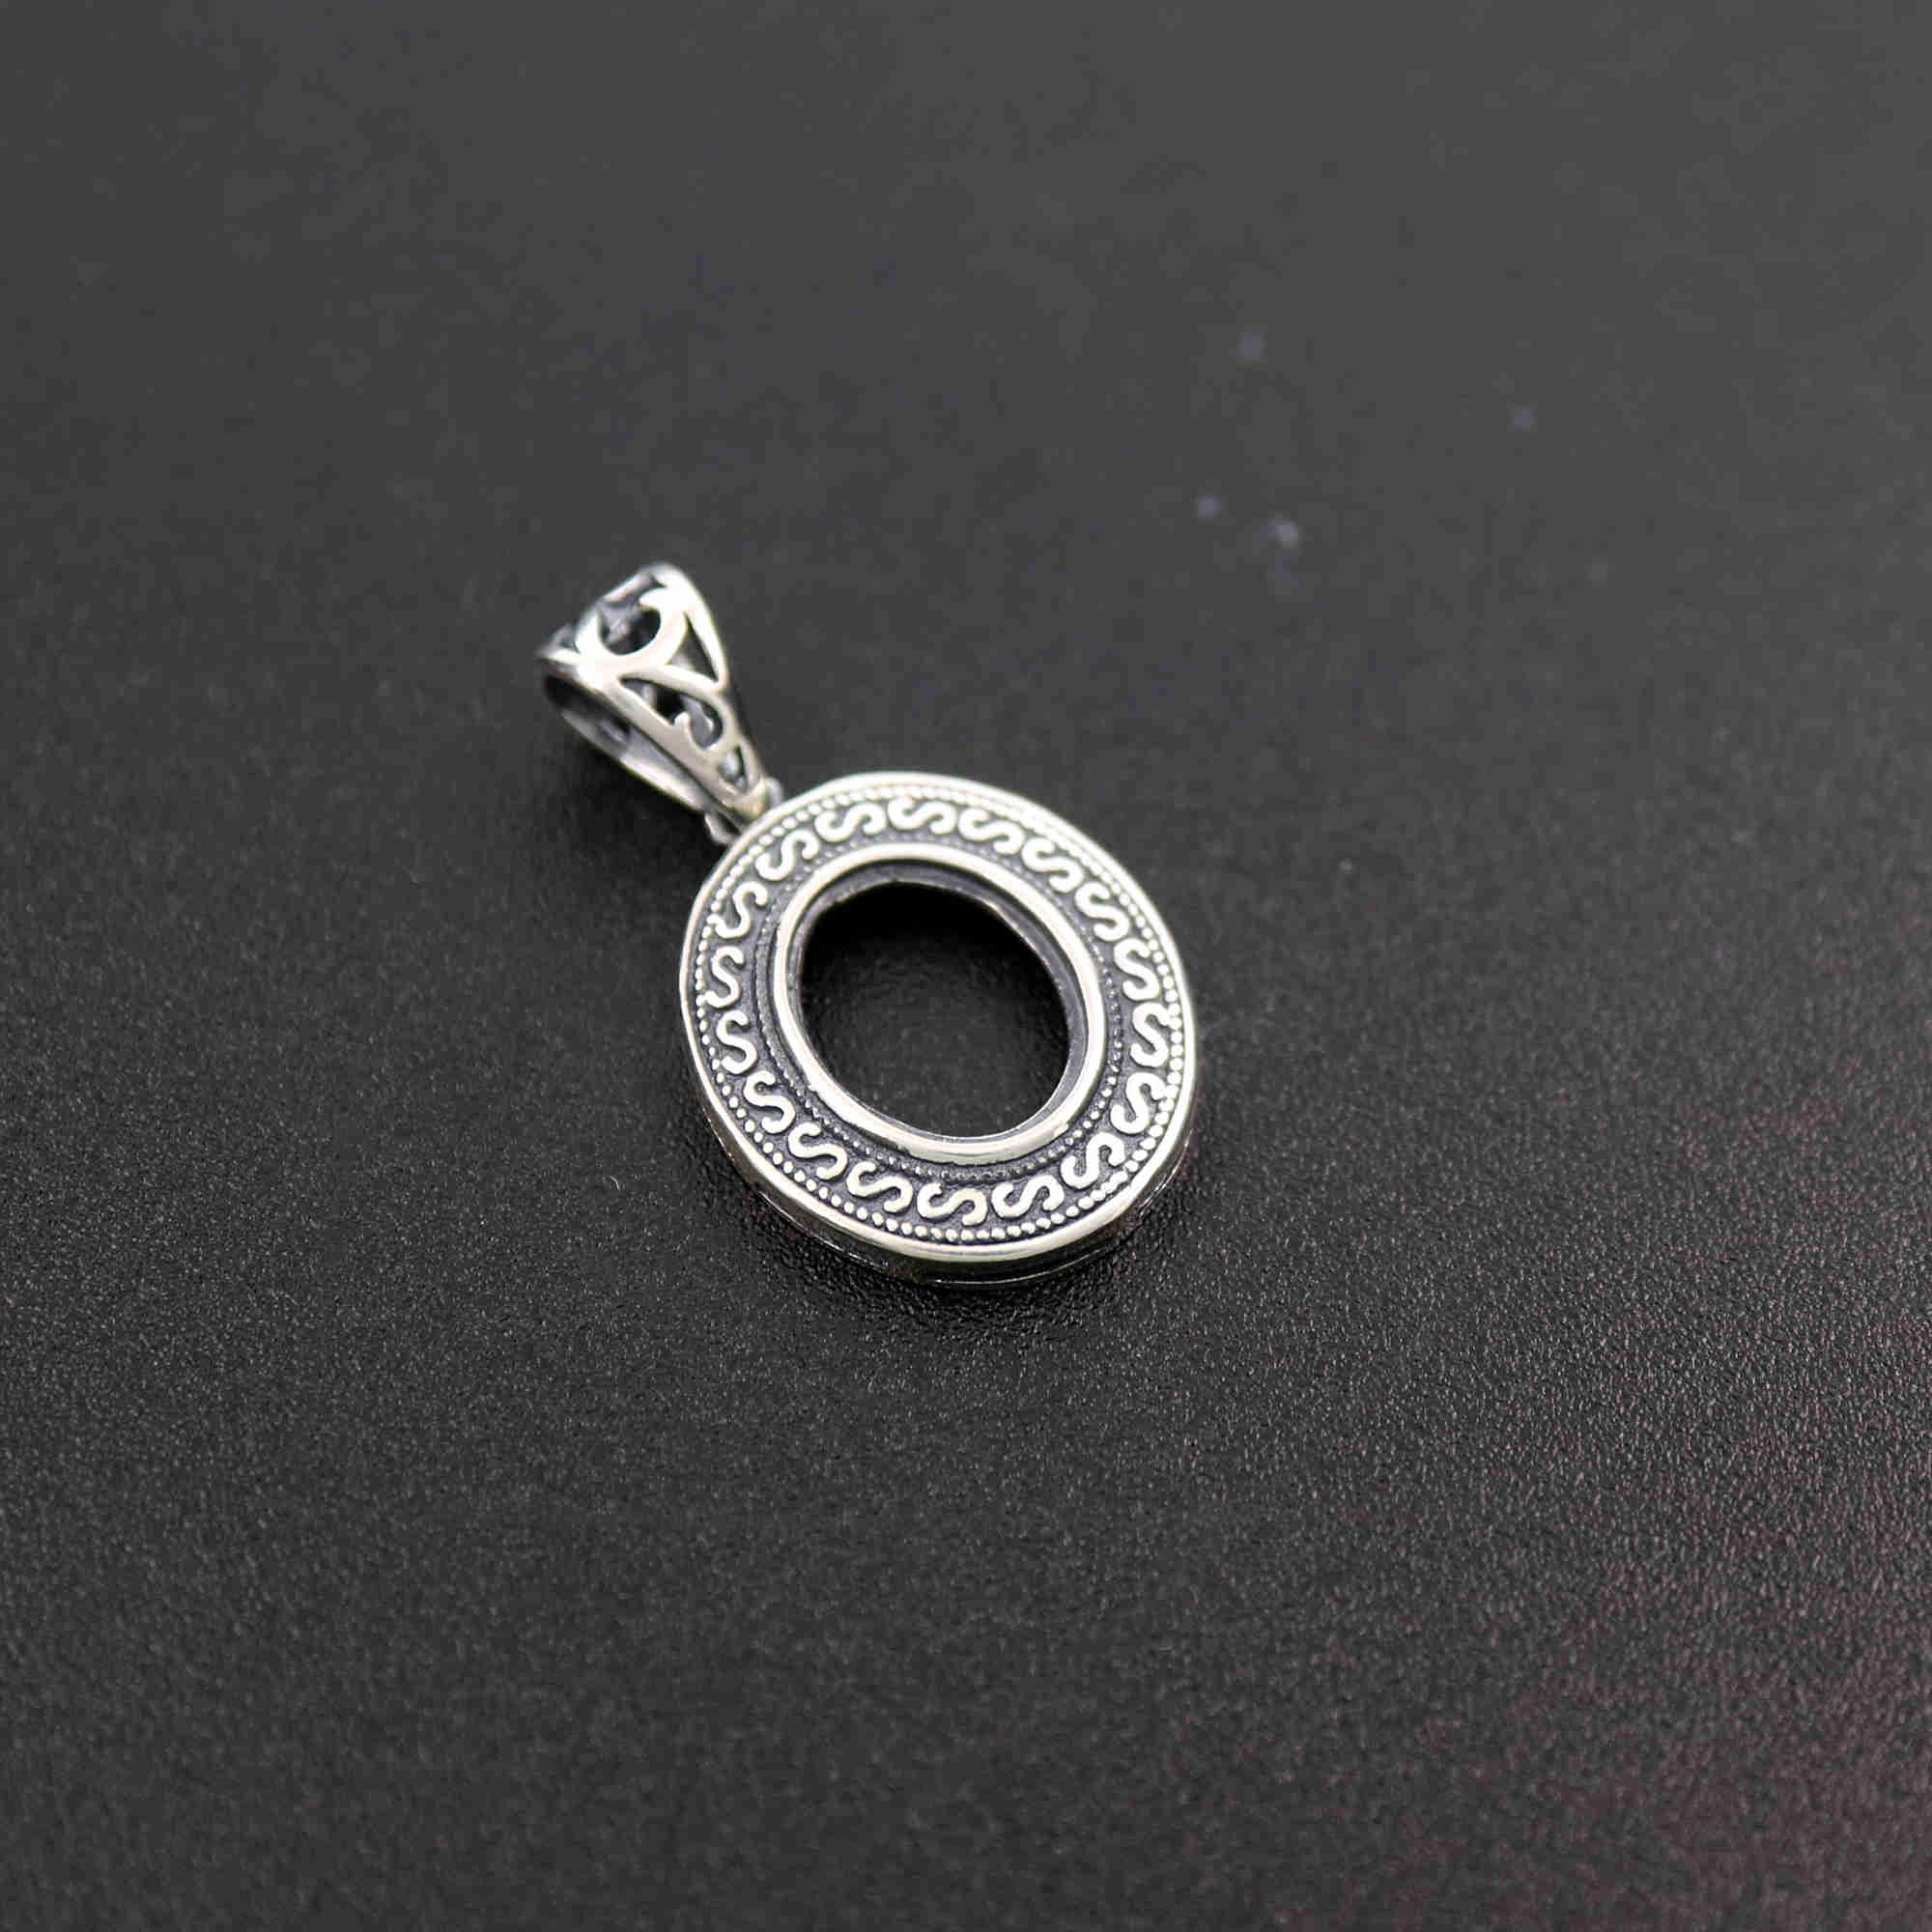 1Pcs 8X10MM Oval Antiqued Style Solid 925 Sterling Silver Cabochon Bezel DIY Pendant Charm Settings 1421109 - Click Image to Close